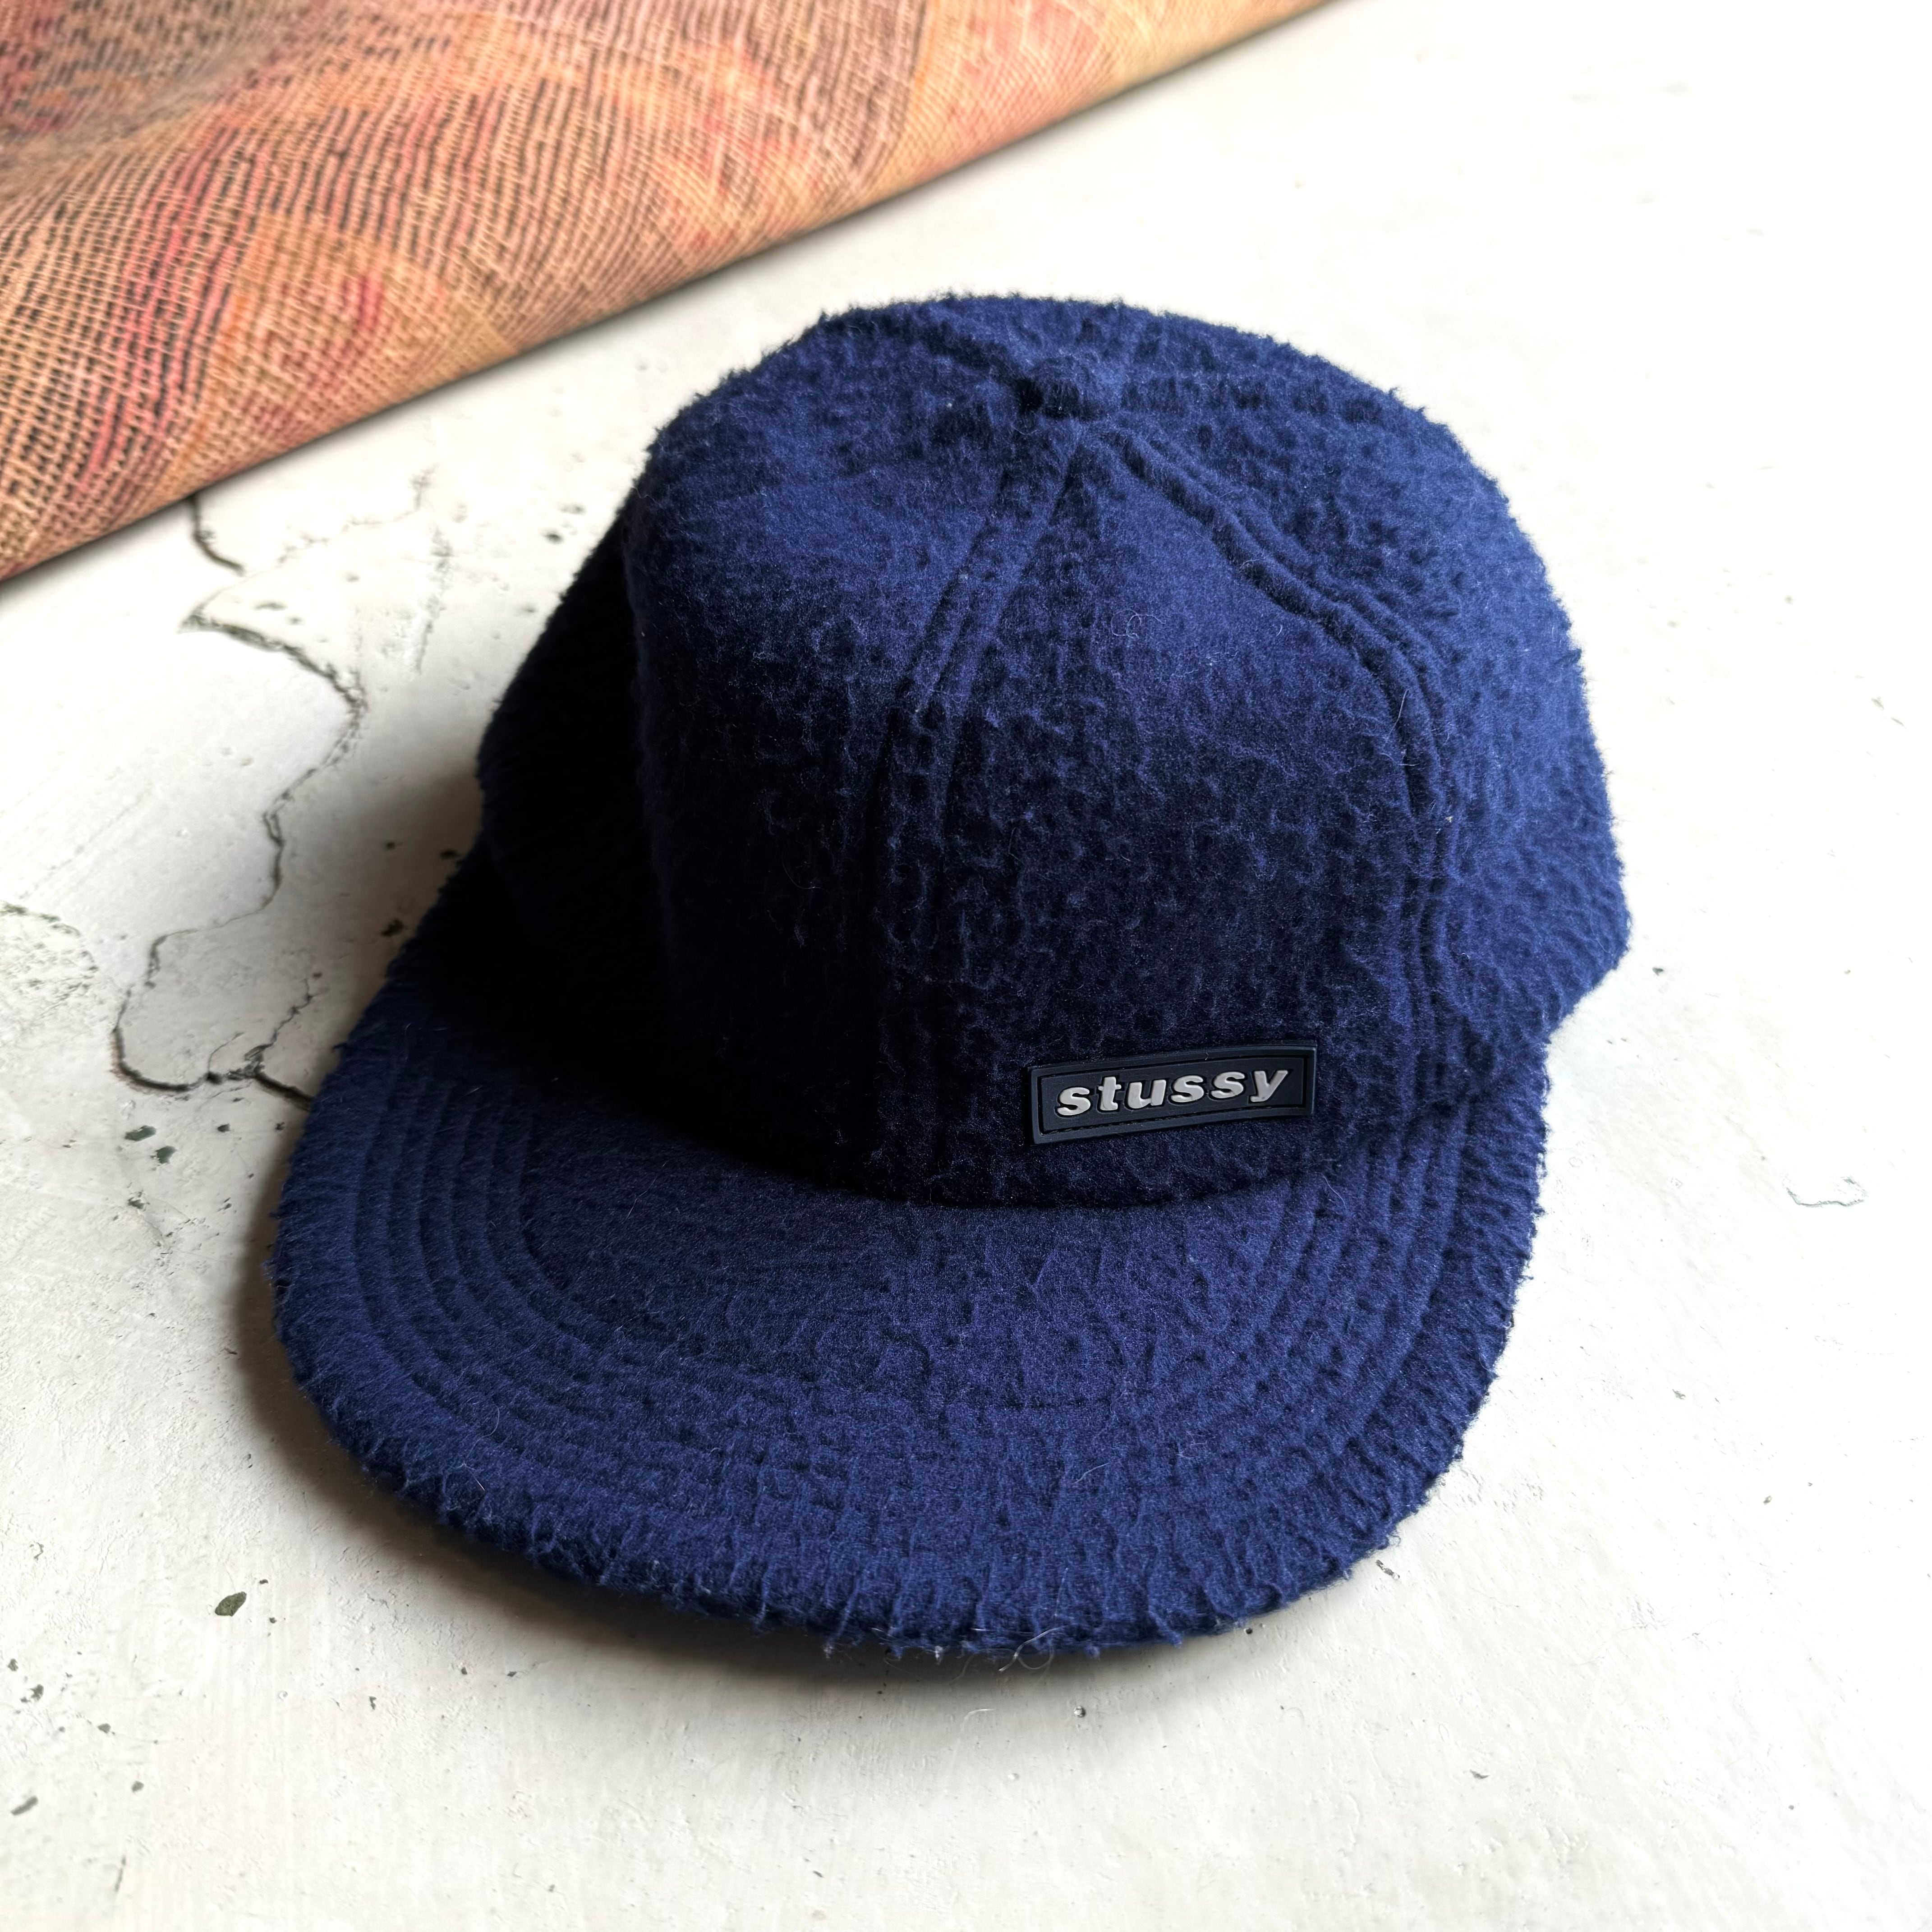 old stussy キャップ 初期 90s USA製 made in usa - キャップ